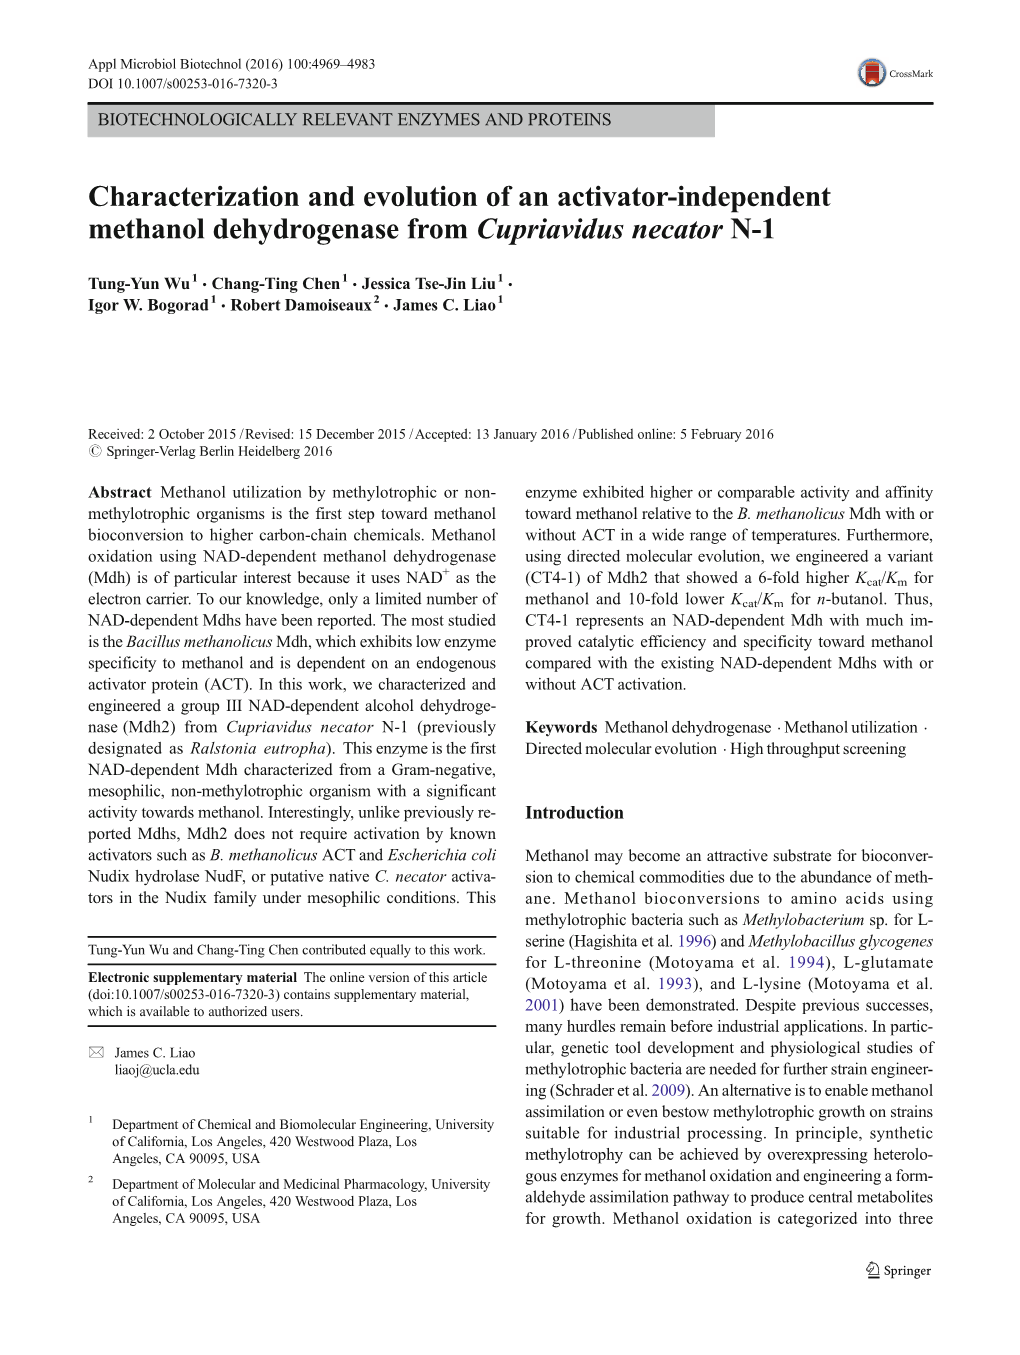 Characterization and Evolution of an Activator-Independent Methanol Dehydrogenase from Cupriavidus Necator N-1